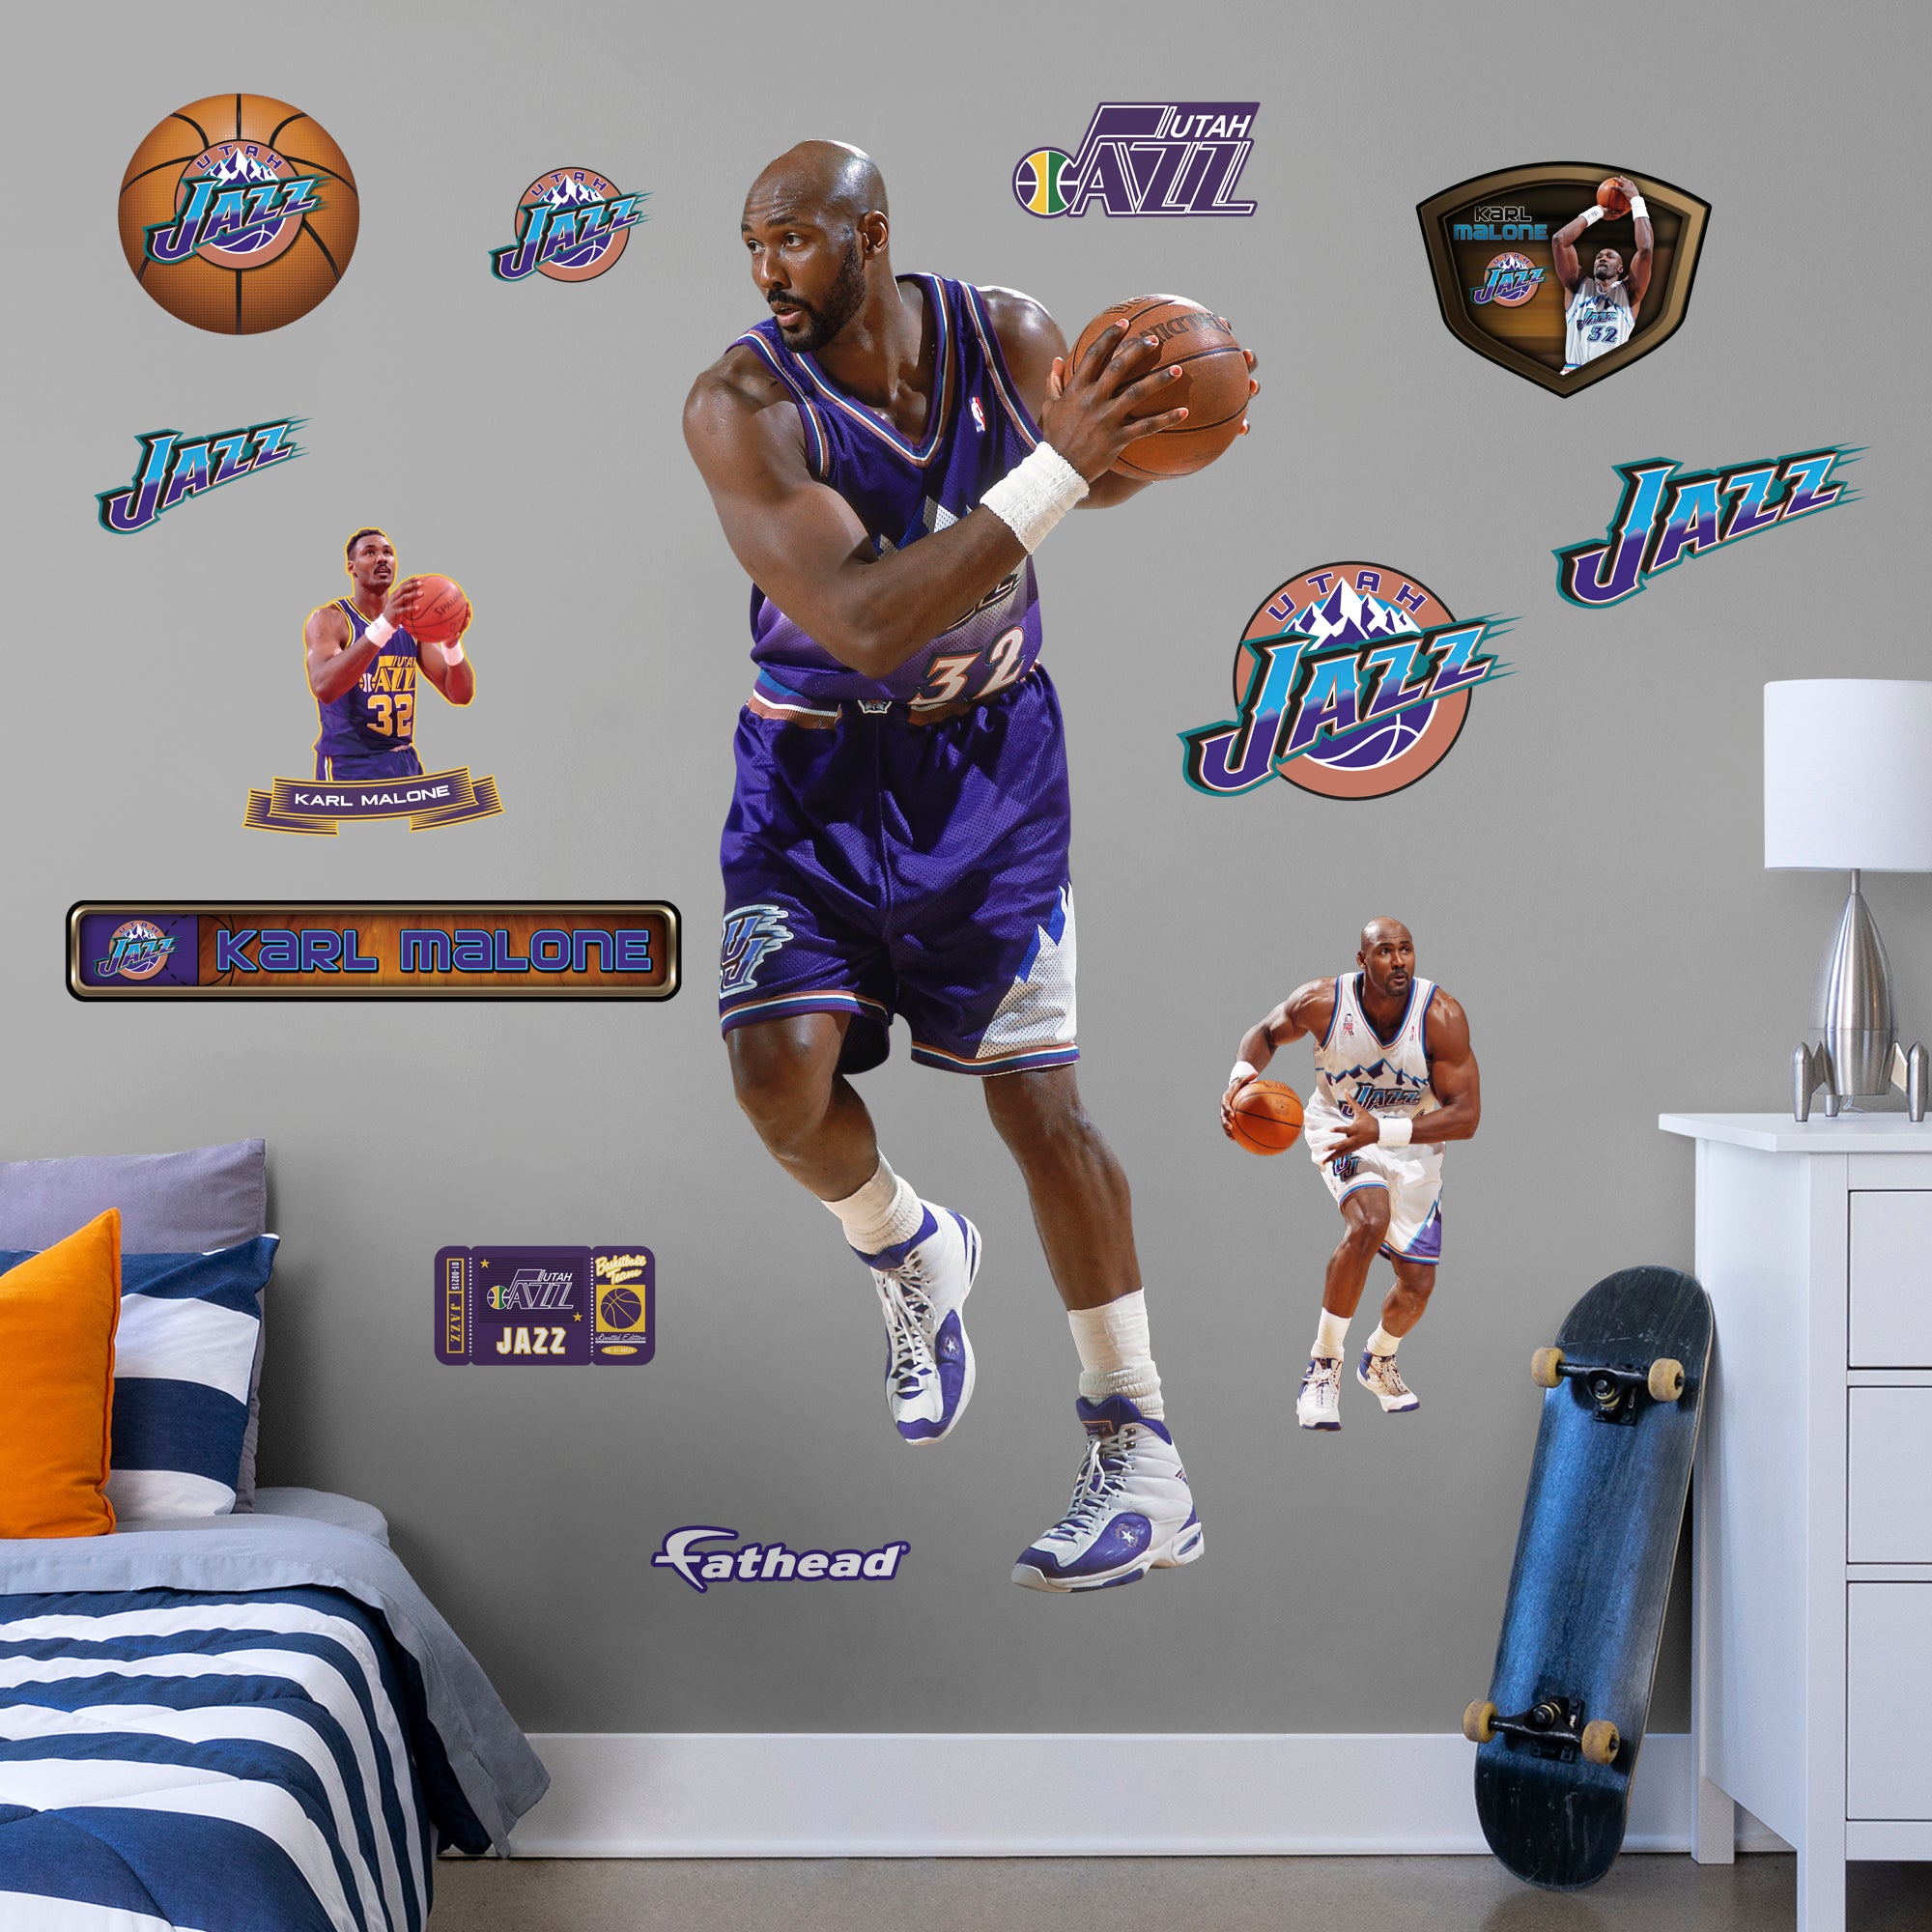 Utah Jazz: Karl Malone Legends Mural        - Officially Licensed NBA Removable Wall   Adhesive Decal